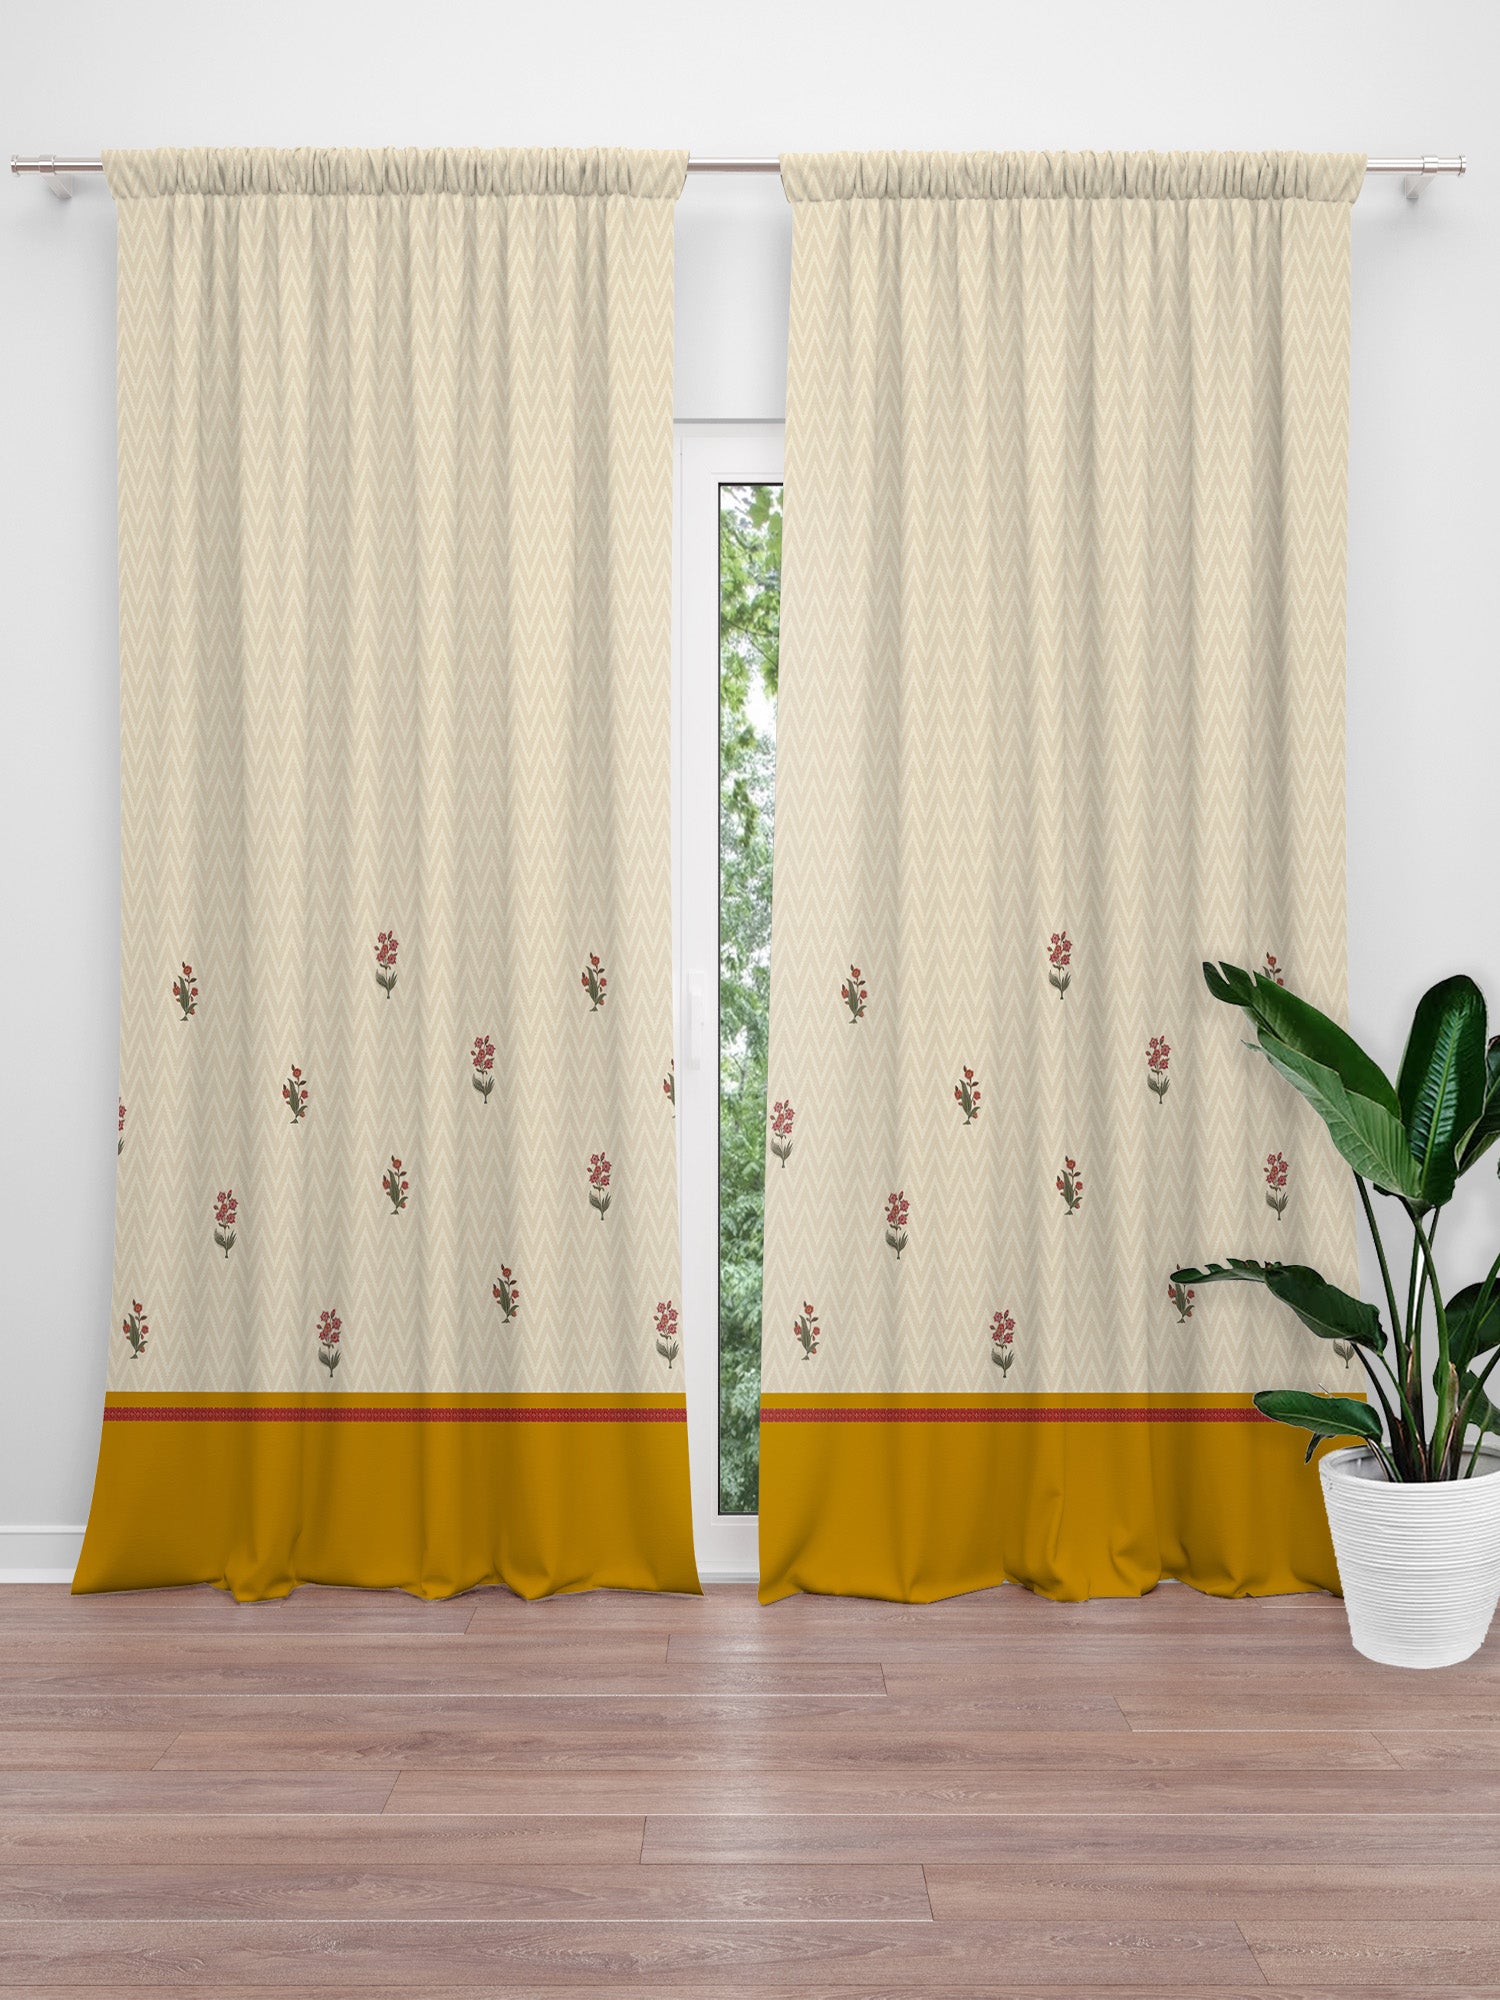 set of 2 blackout door curtains with hidden loop and floral print with mustard border at bottom, 7feet, 50x84 inch